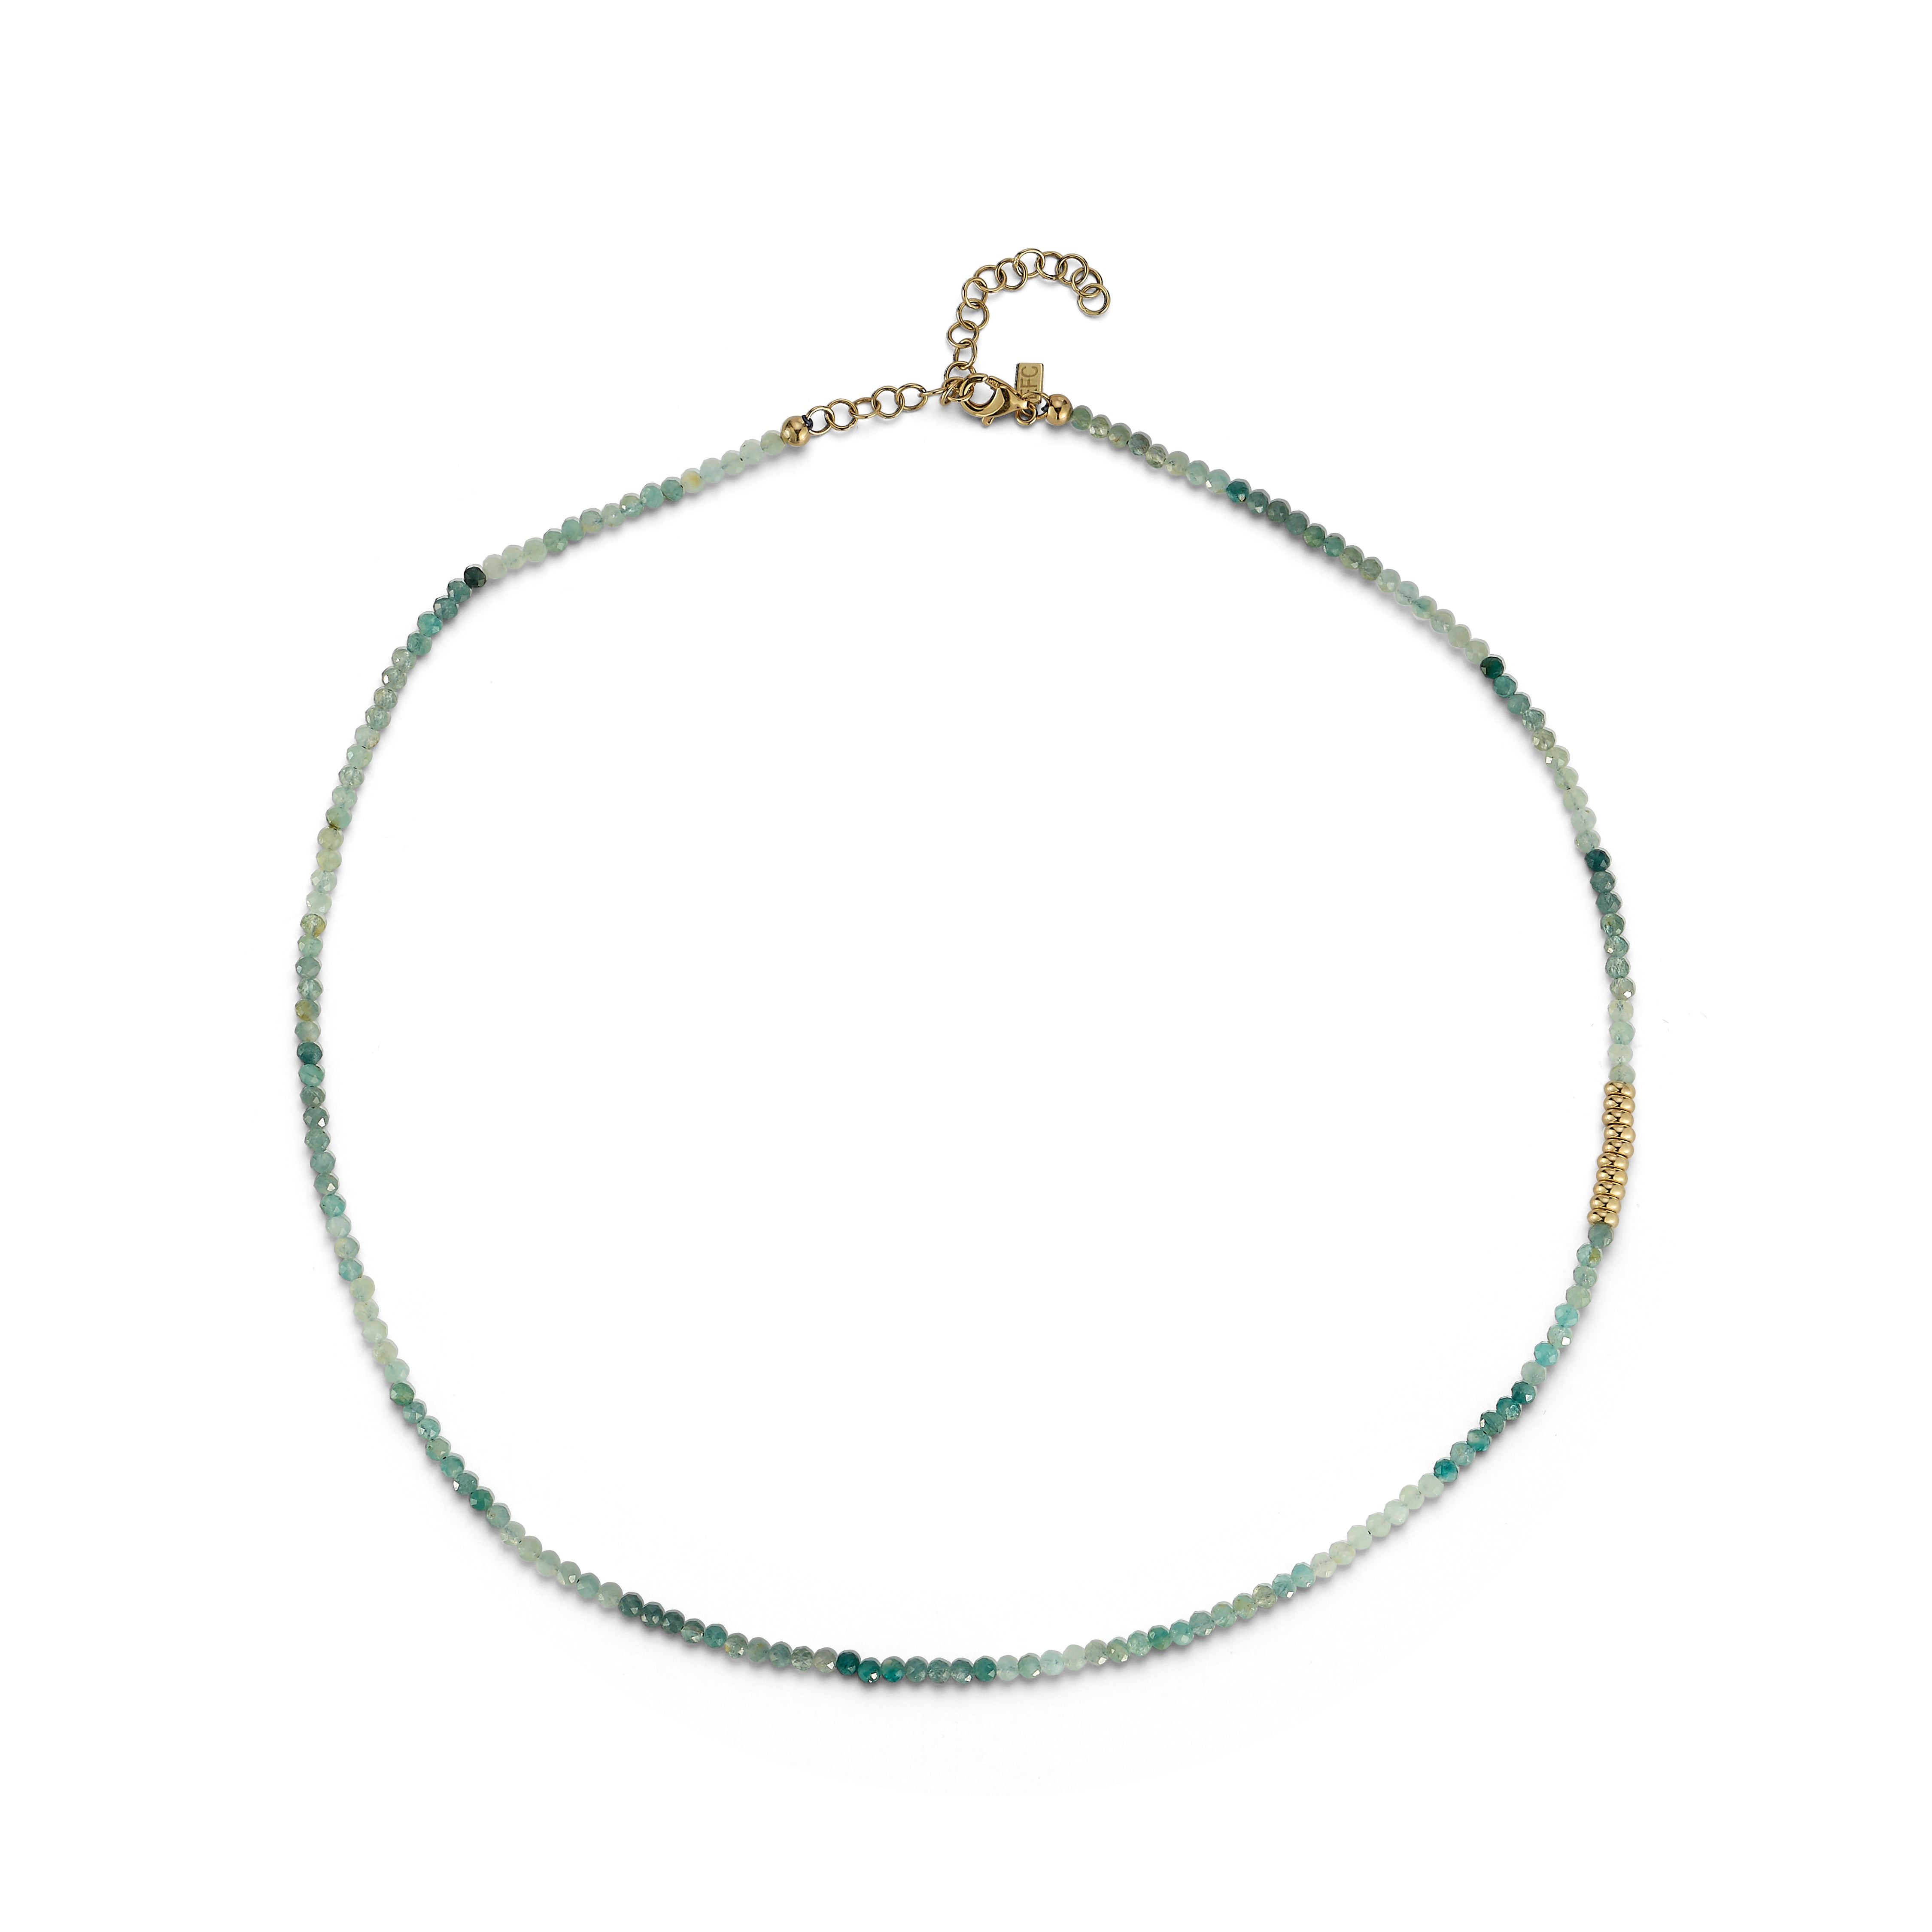 Ombré Tourmaline Birthstone Bead Necklace in 14k yellow gold